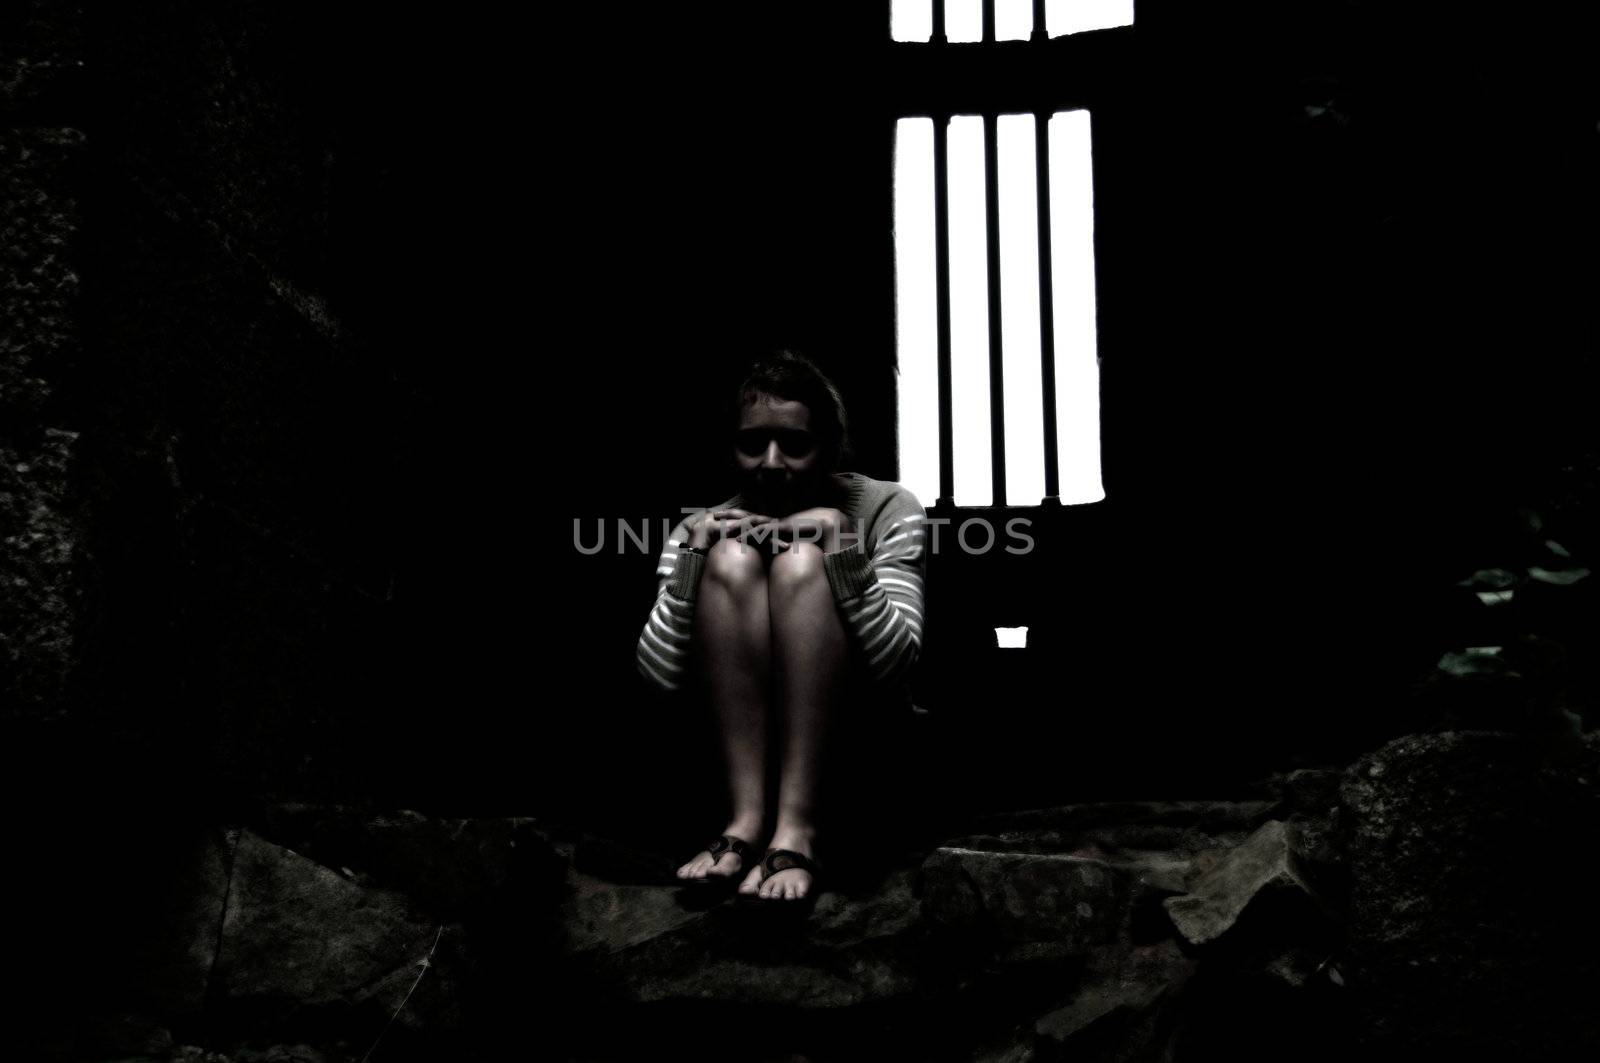 Young woman sitting in a dark dungeon or prison.